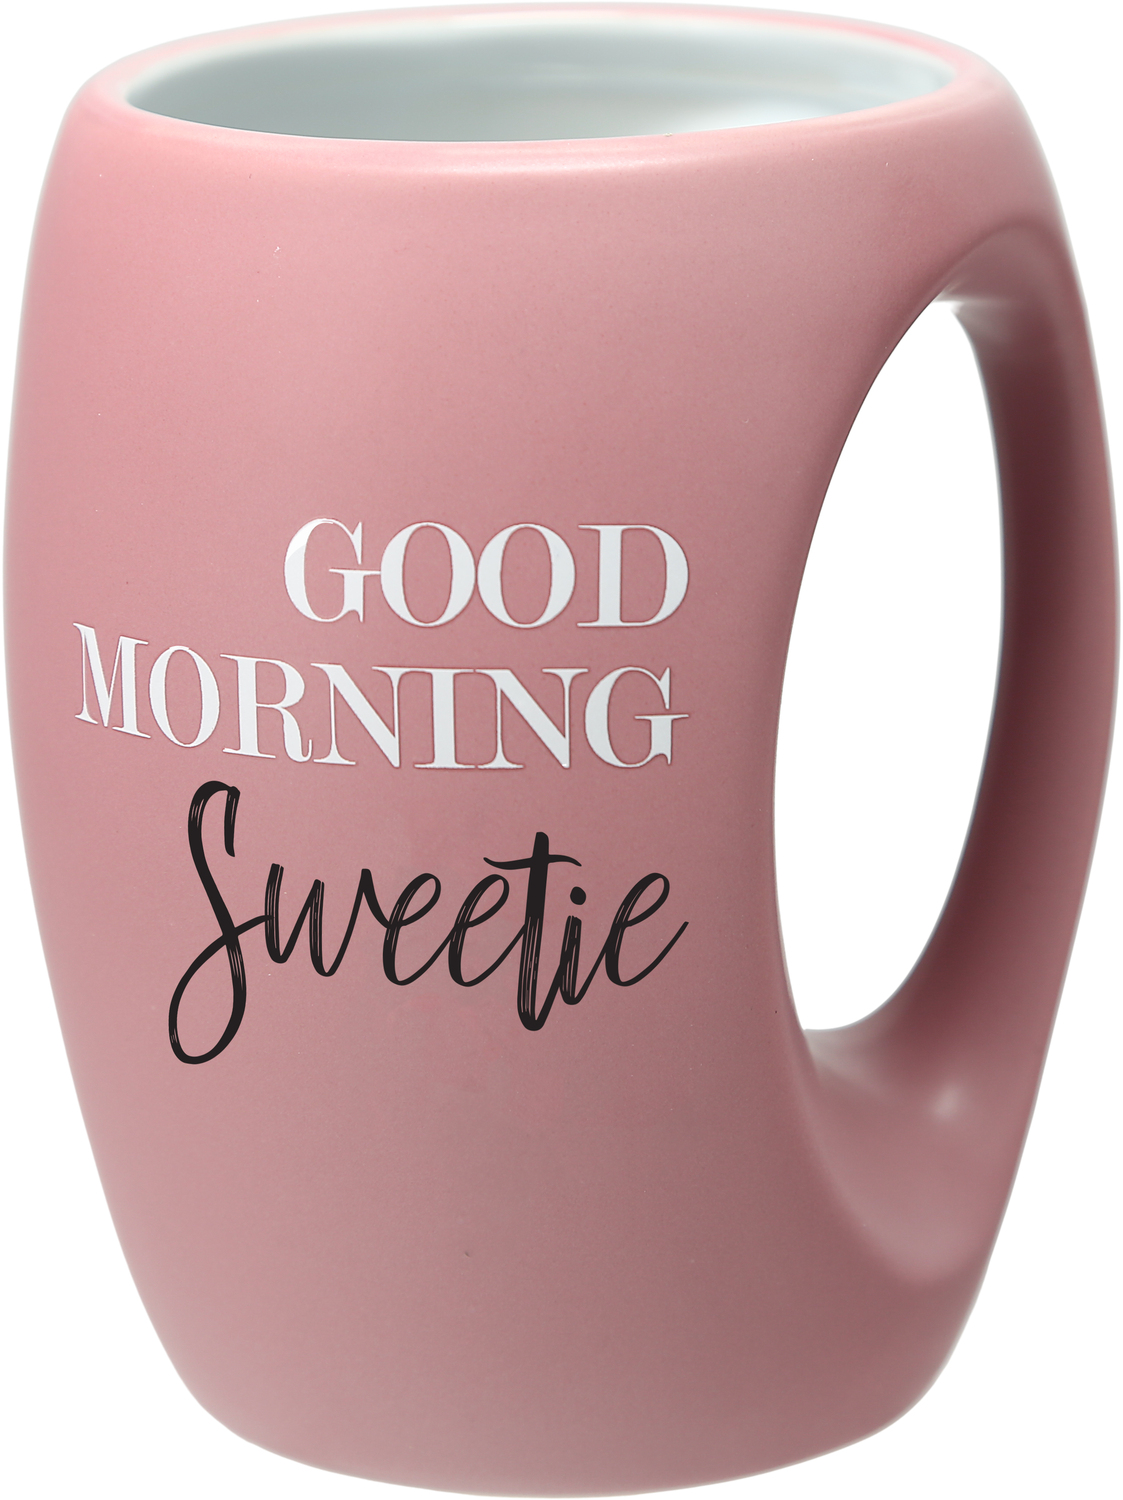 Sweetie by Good Morning - Sweetie - 16 oz Cup